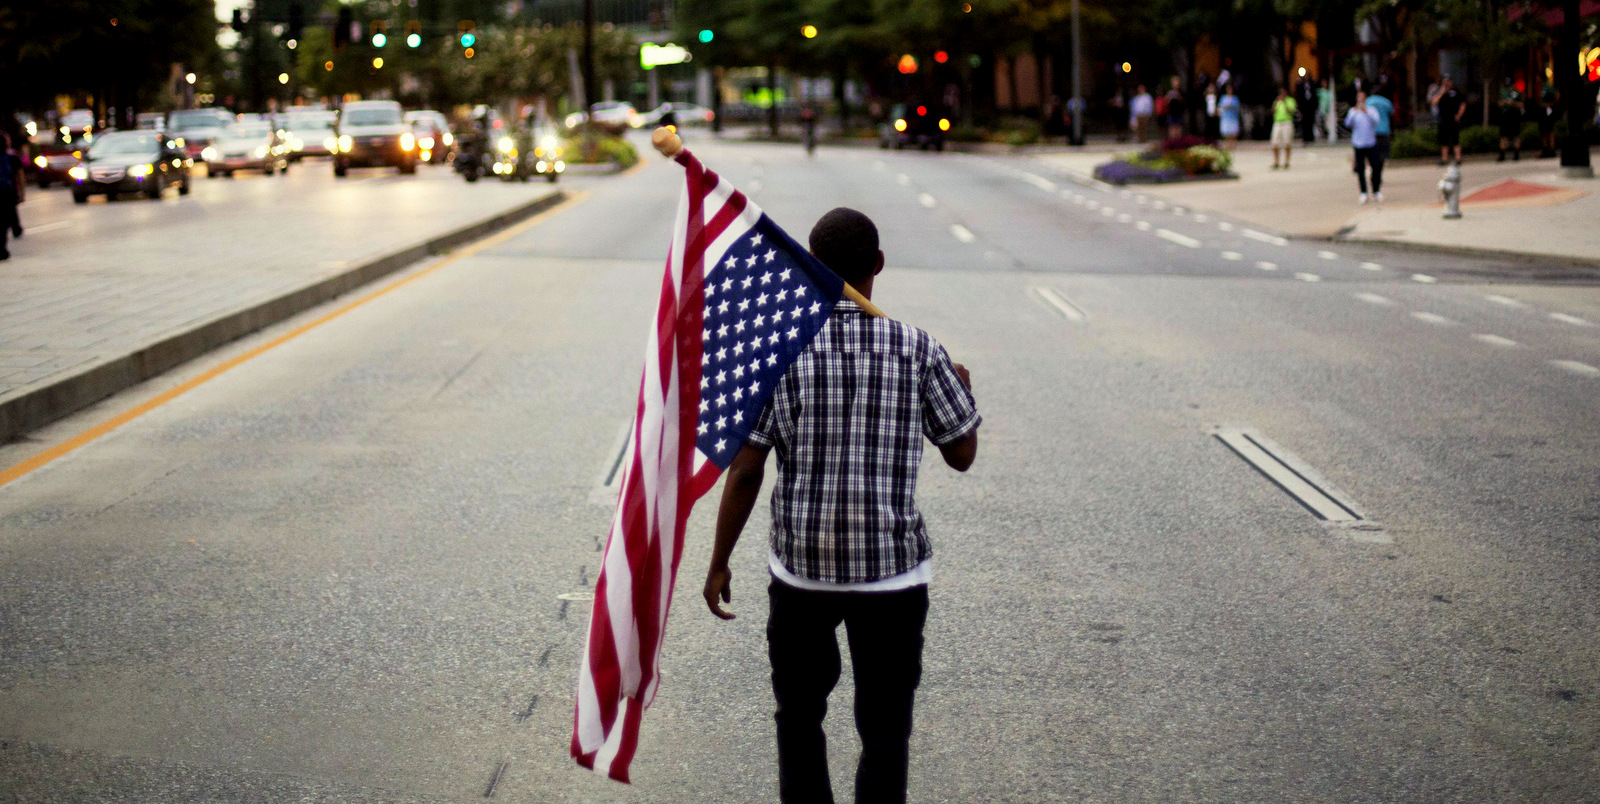 Skylar Barrett walks alone with an American flag in the middle of the street during a march through the Buckhead neighborhood against the recent police shootings of African-Americans on July 11, 2016, in Atlanta. (AP/David Goldman)